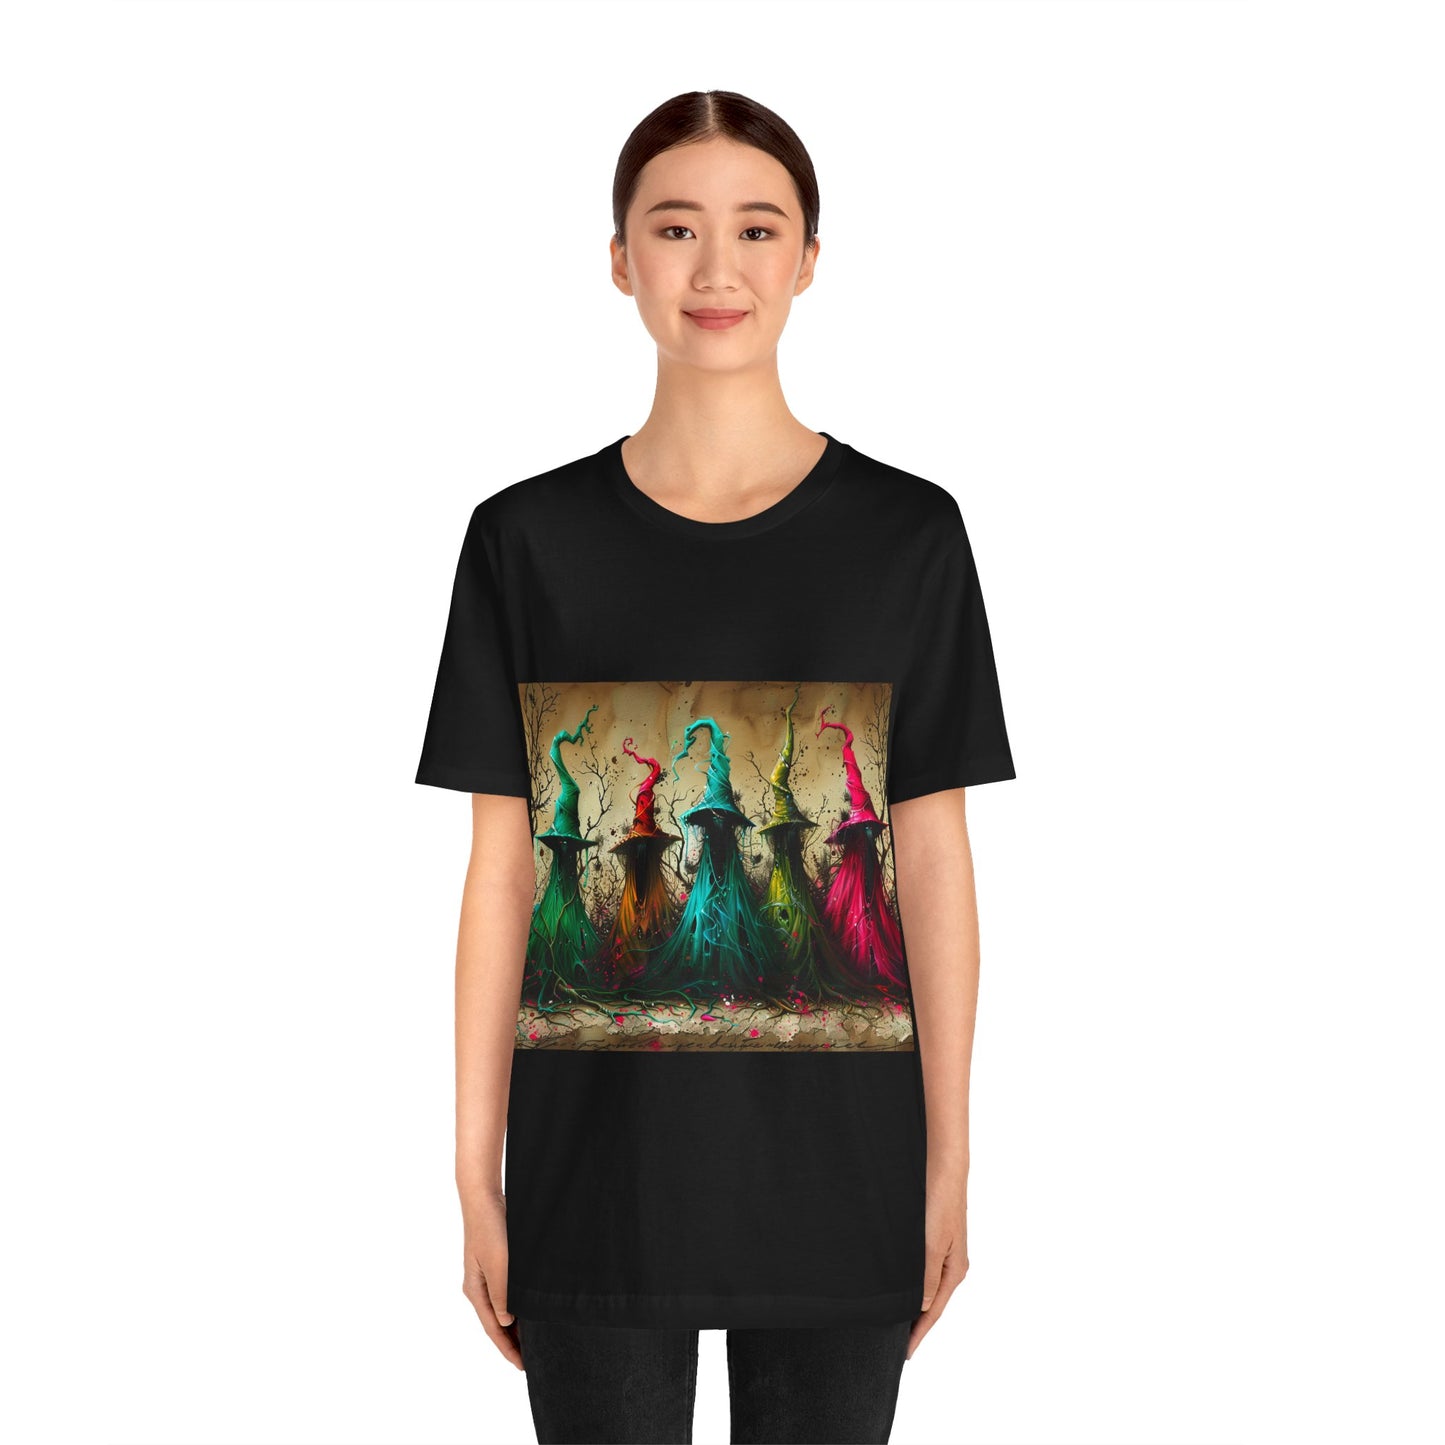 Unisex Jersey Short Sleeve Tee: Witches and Wizards #3